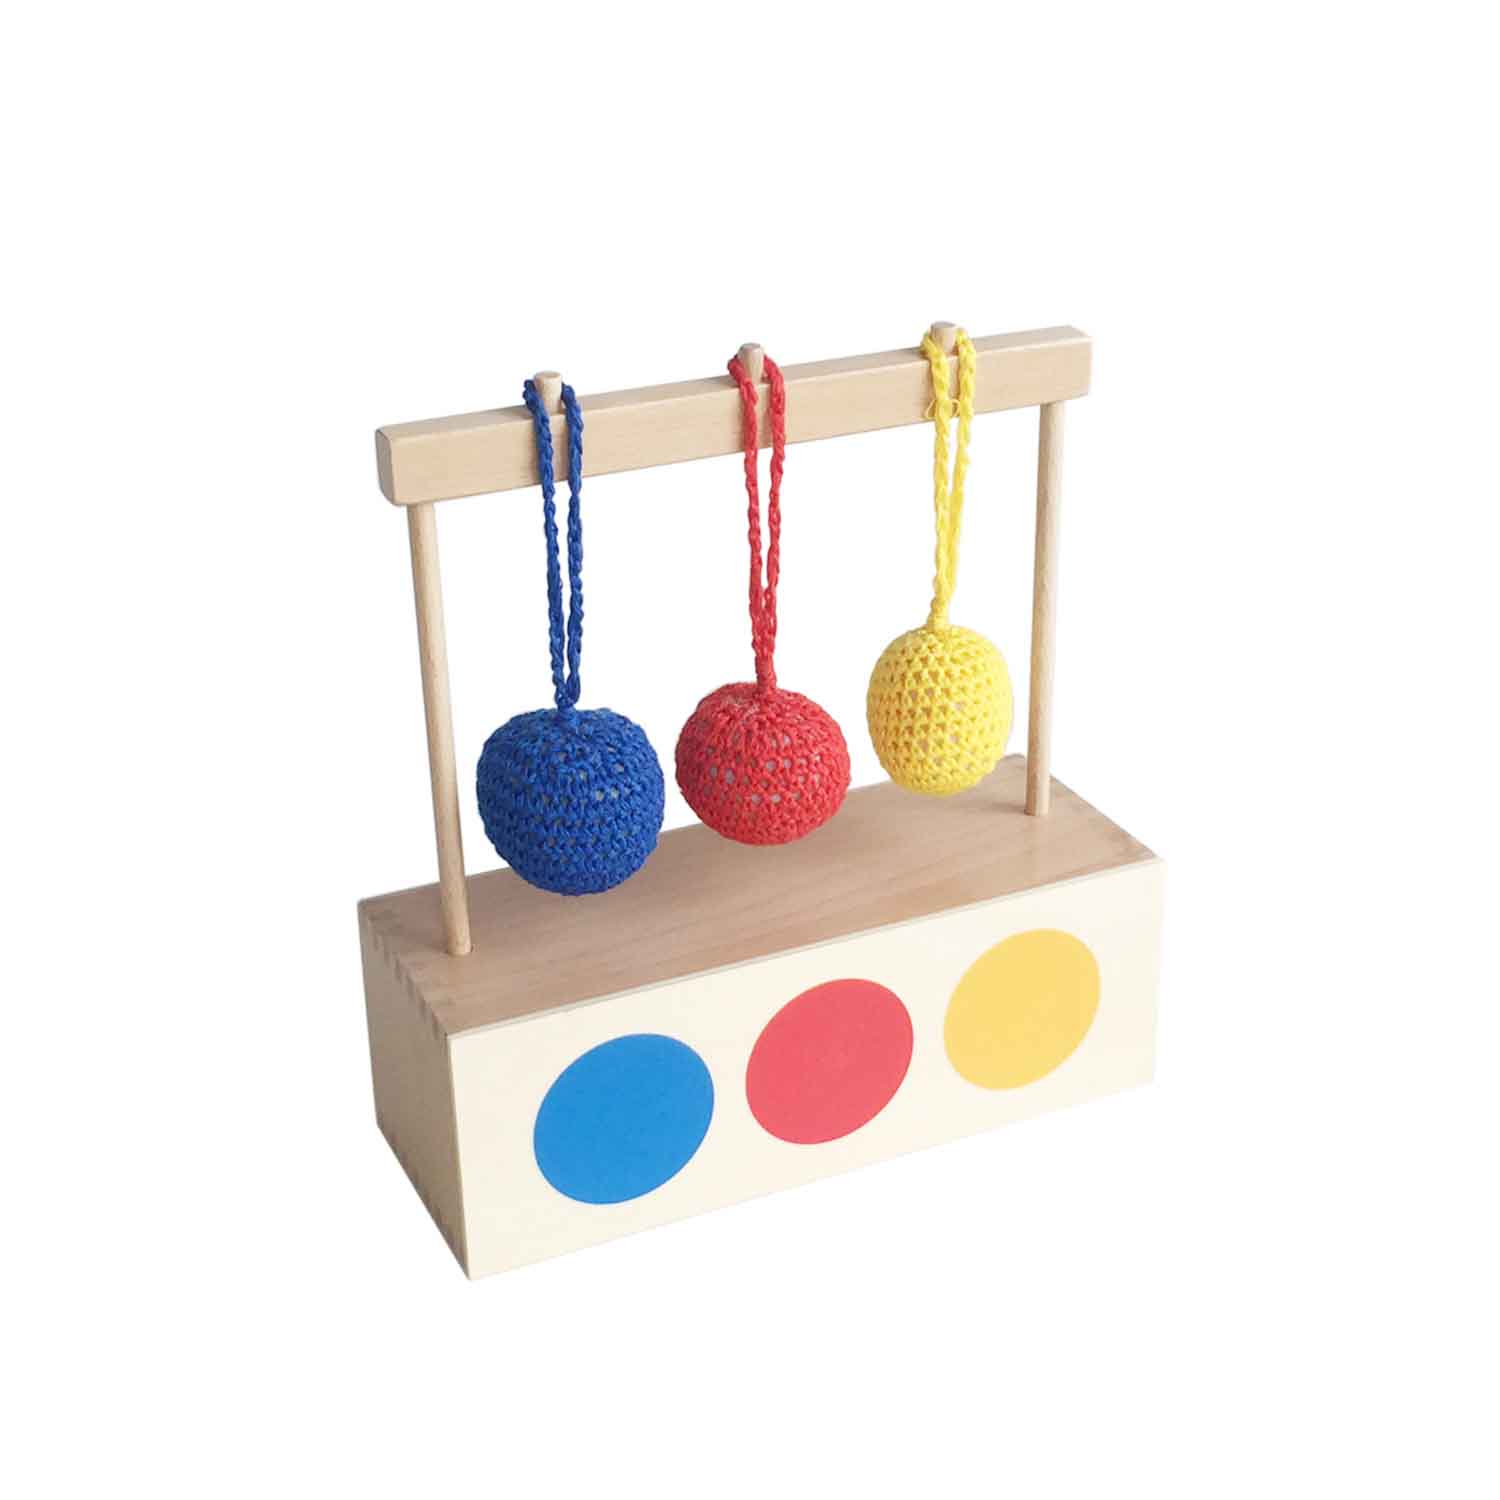 Imbucare box with 3 colored knit balls